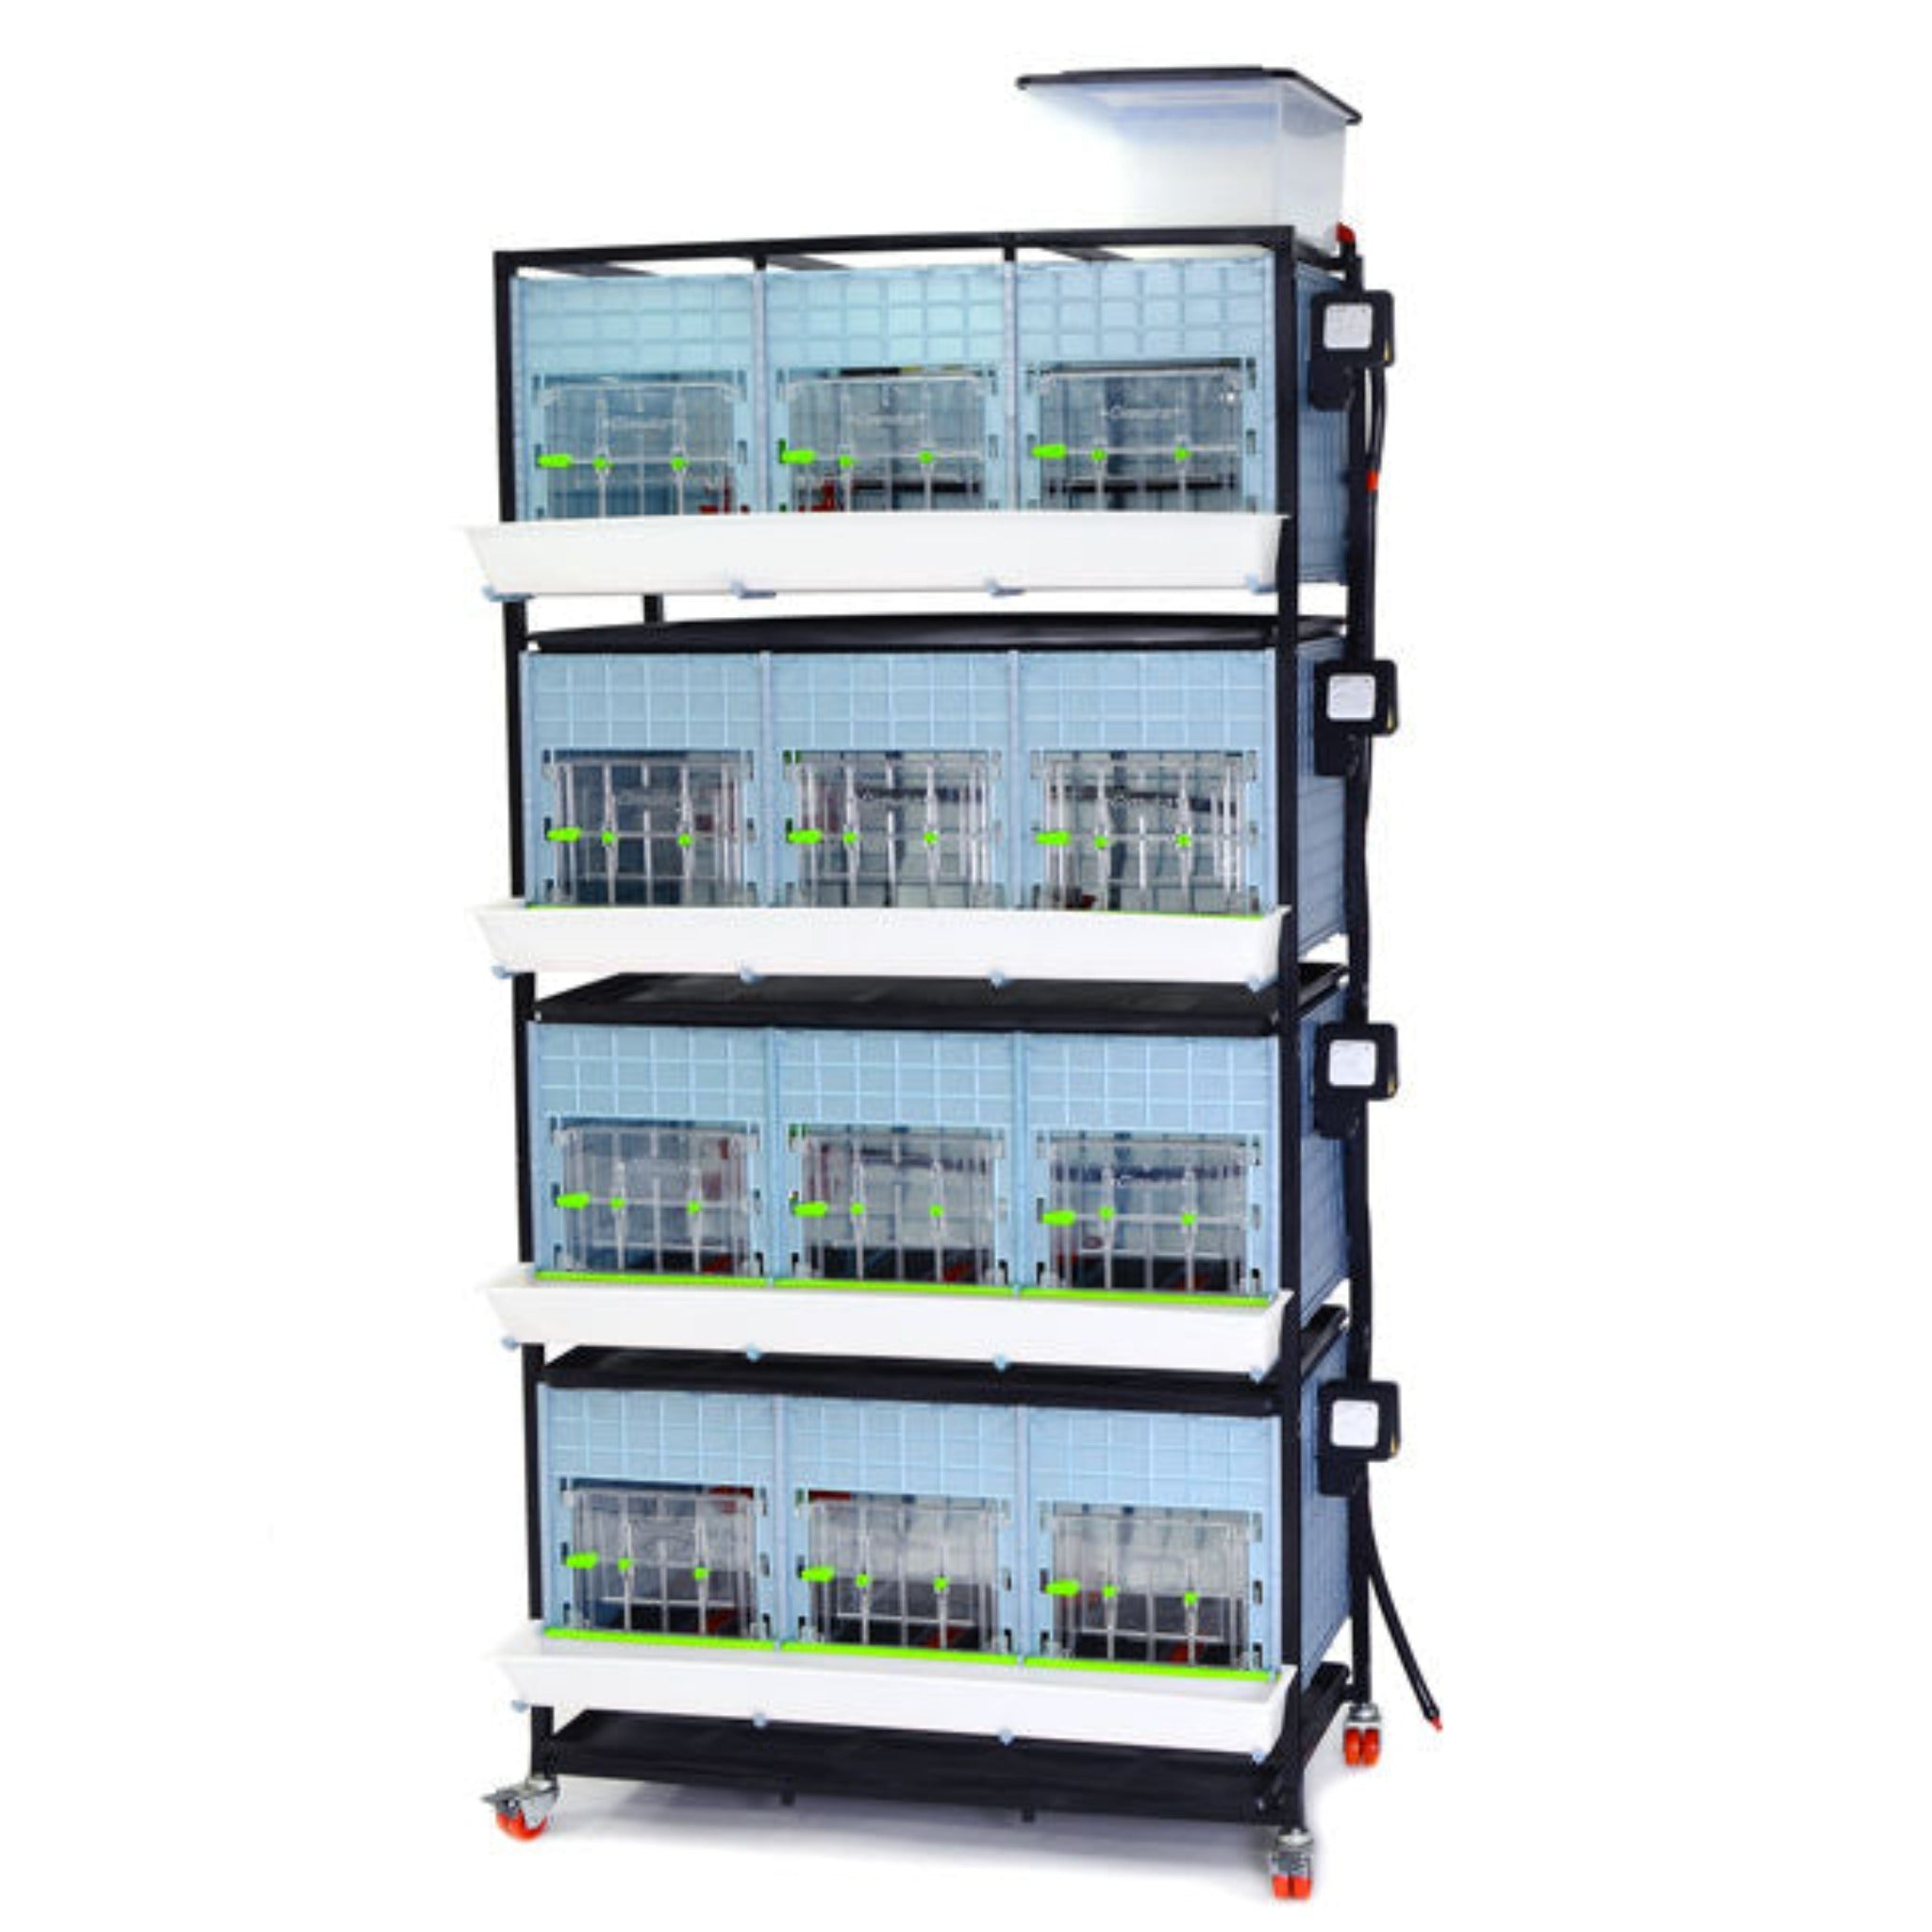 Hatching Time Cimuka 3 Layer 15 Inch Brooder front visible. Feeding trough is located on front of brooders. Clear plastic doors with locks can be seen. Heater thermostat visible on side of brooders. Brooders are on Metal frame with rolling casters for mobility.